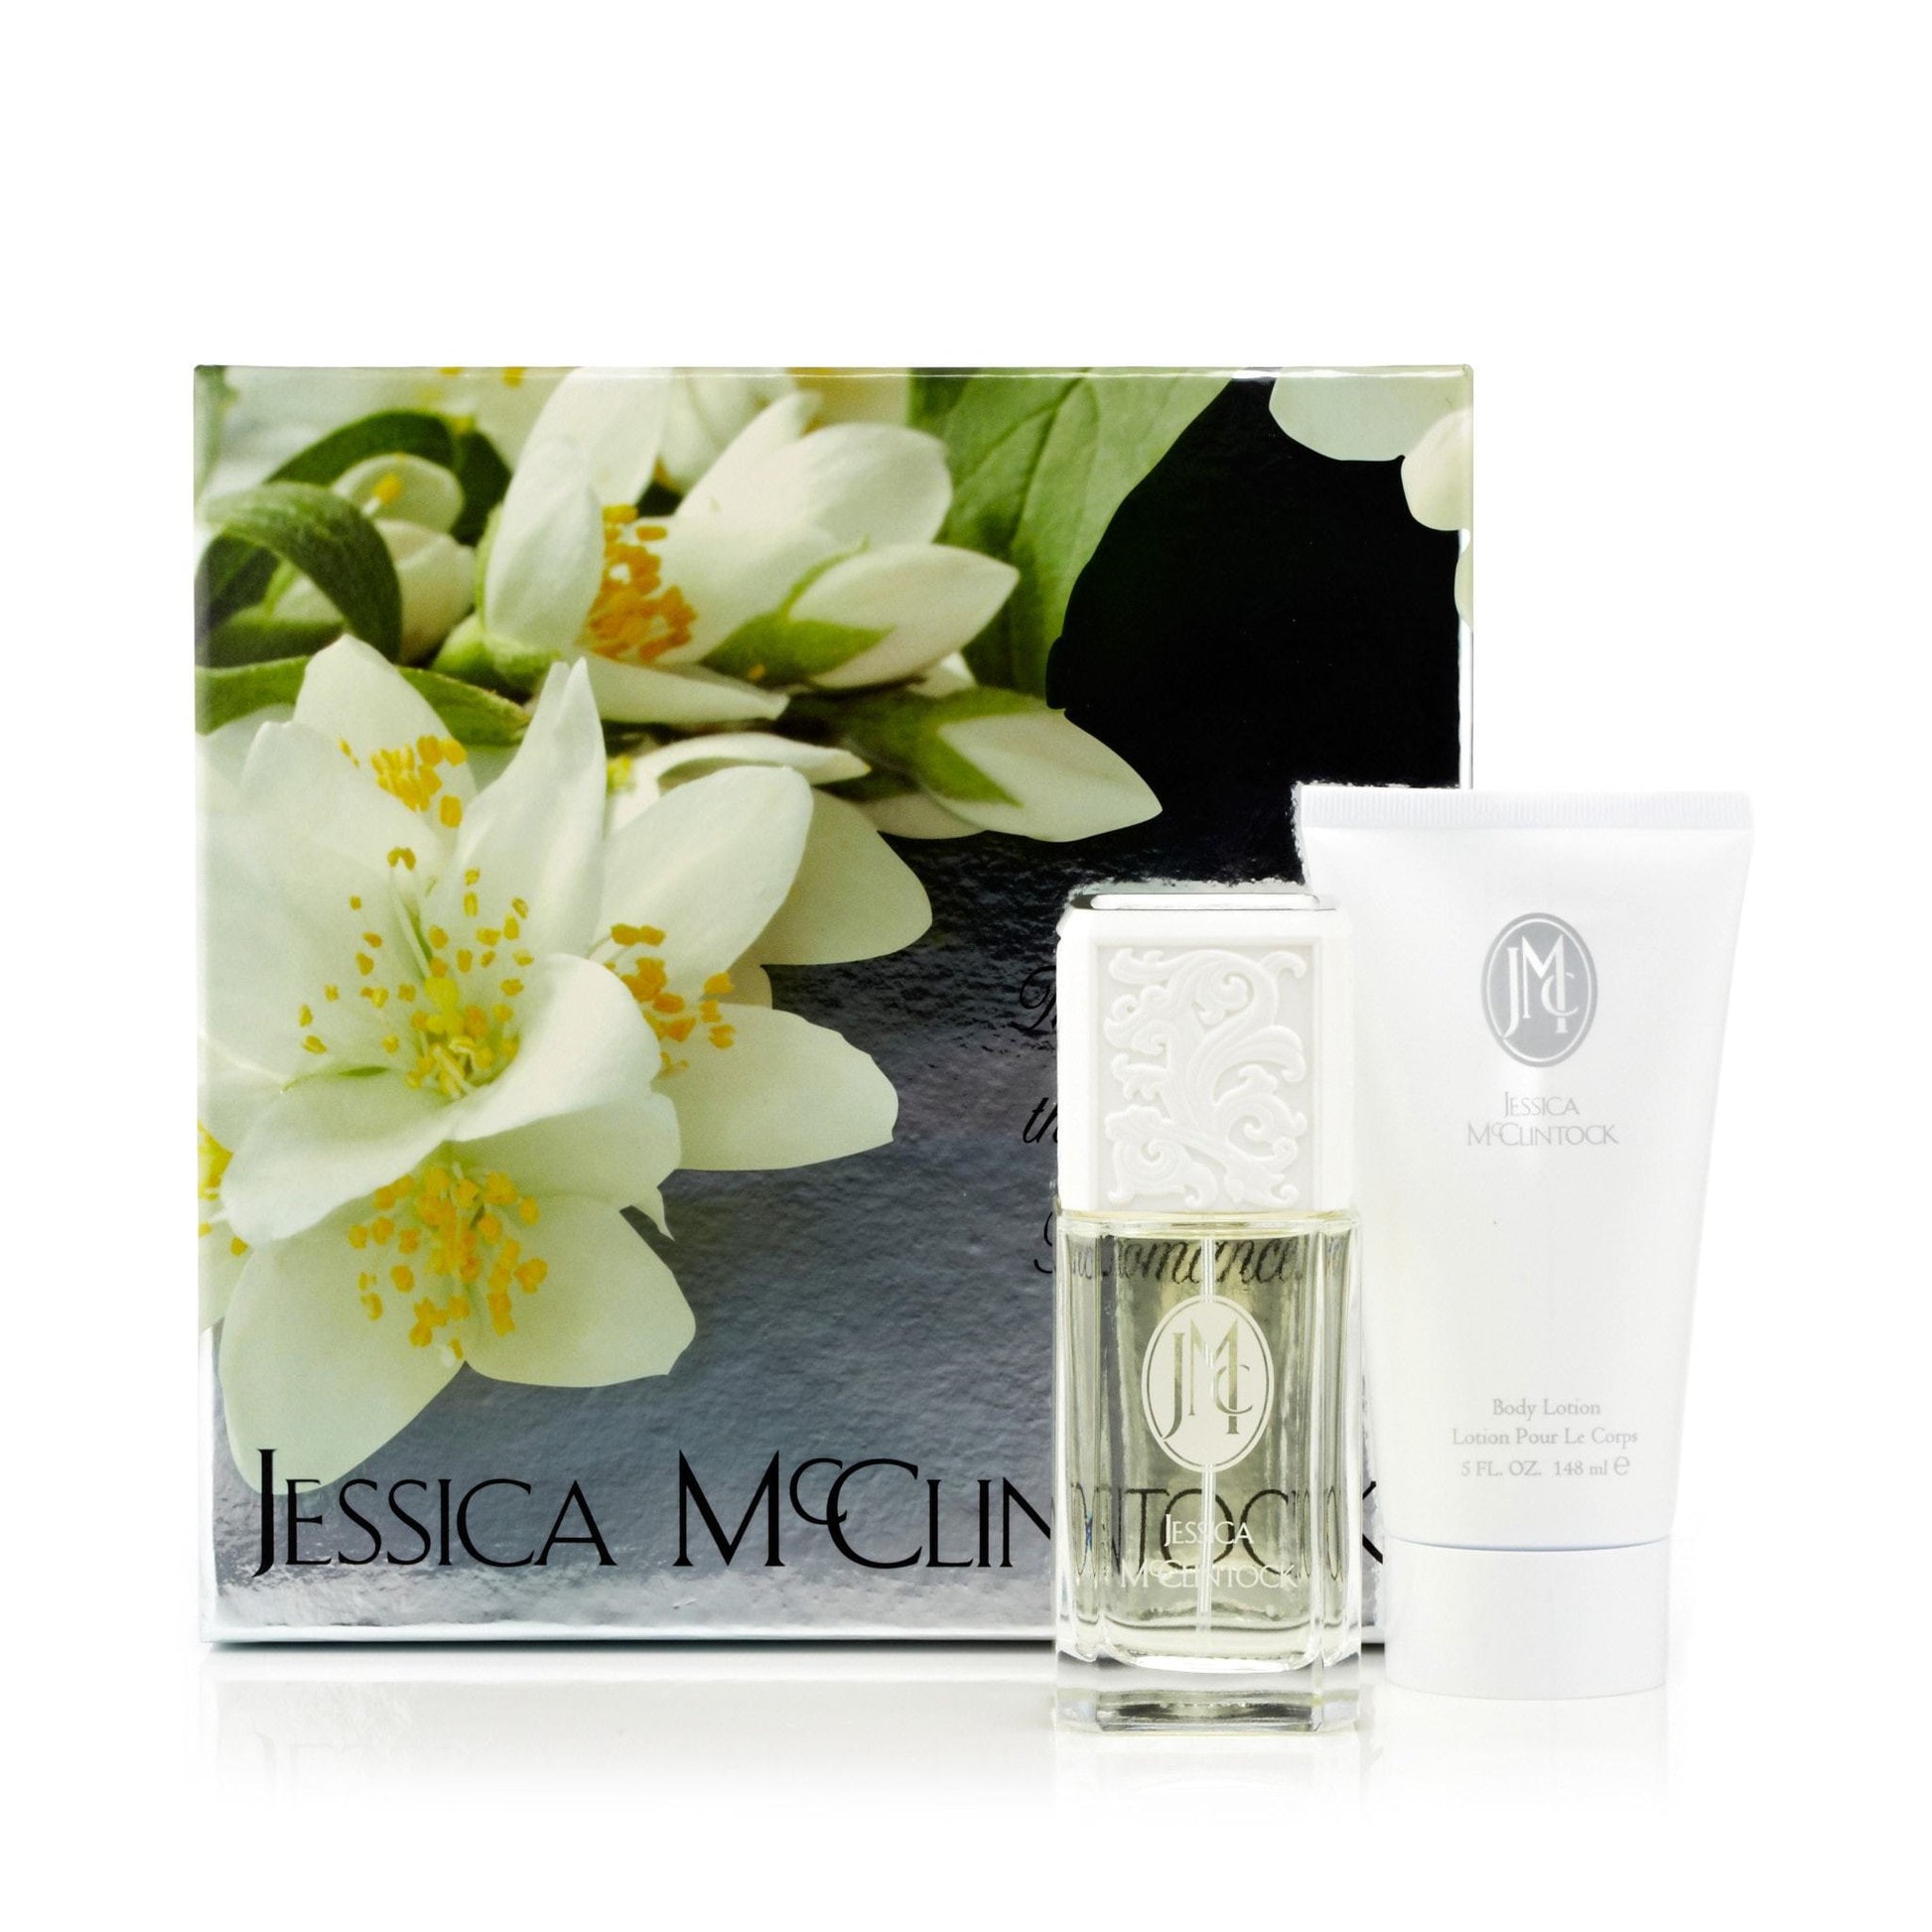 Jessica Mcclintock Gift Set for Women by Jessica McClintock, Product image 2